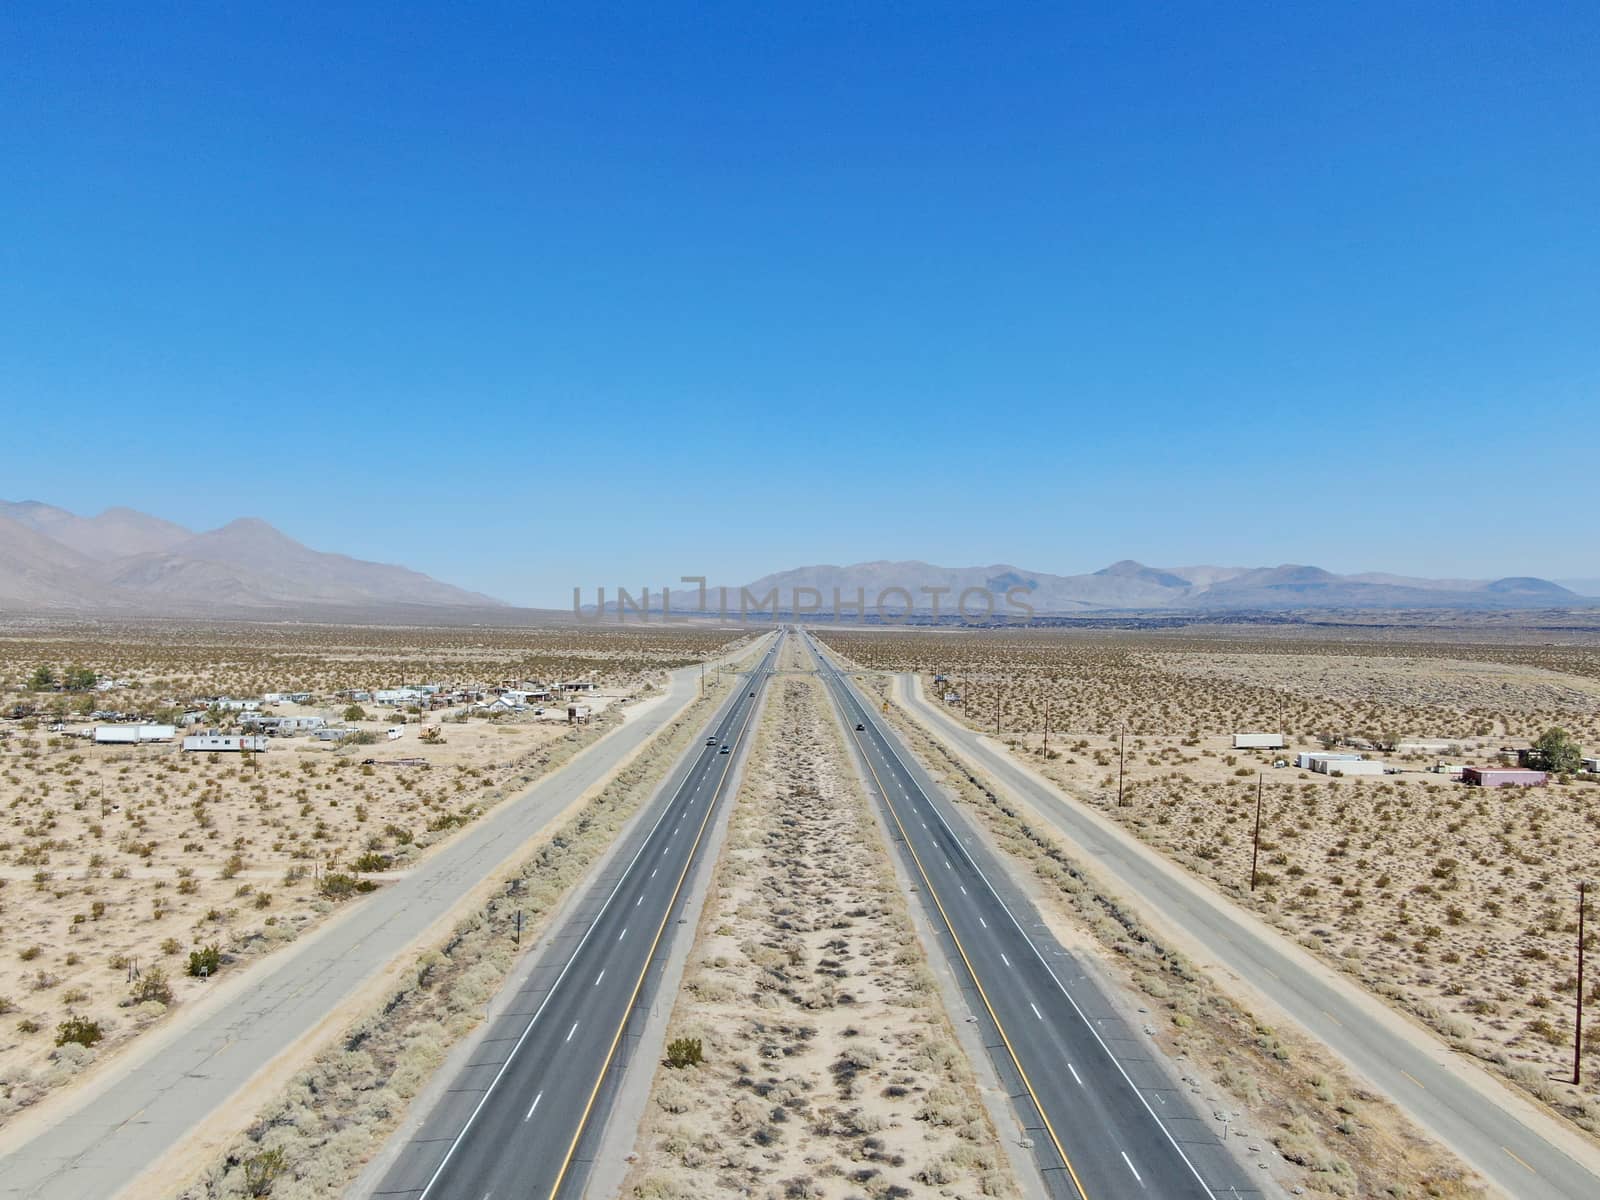 Aerial view of road in the middle of the desert under blue sky in California's Mojave desert, near Ridgecrest.  by Bonandbon